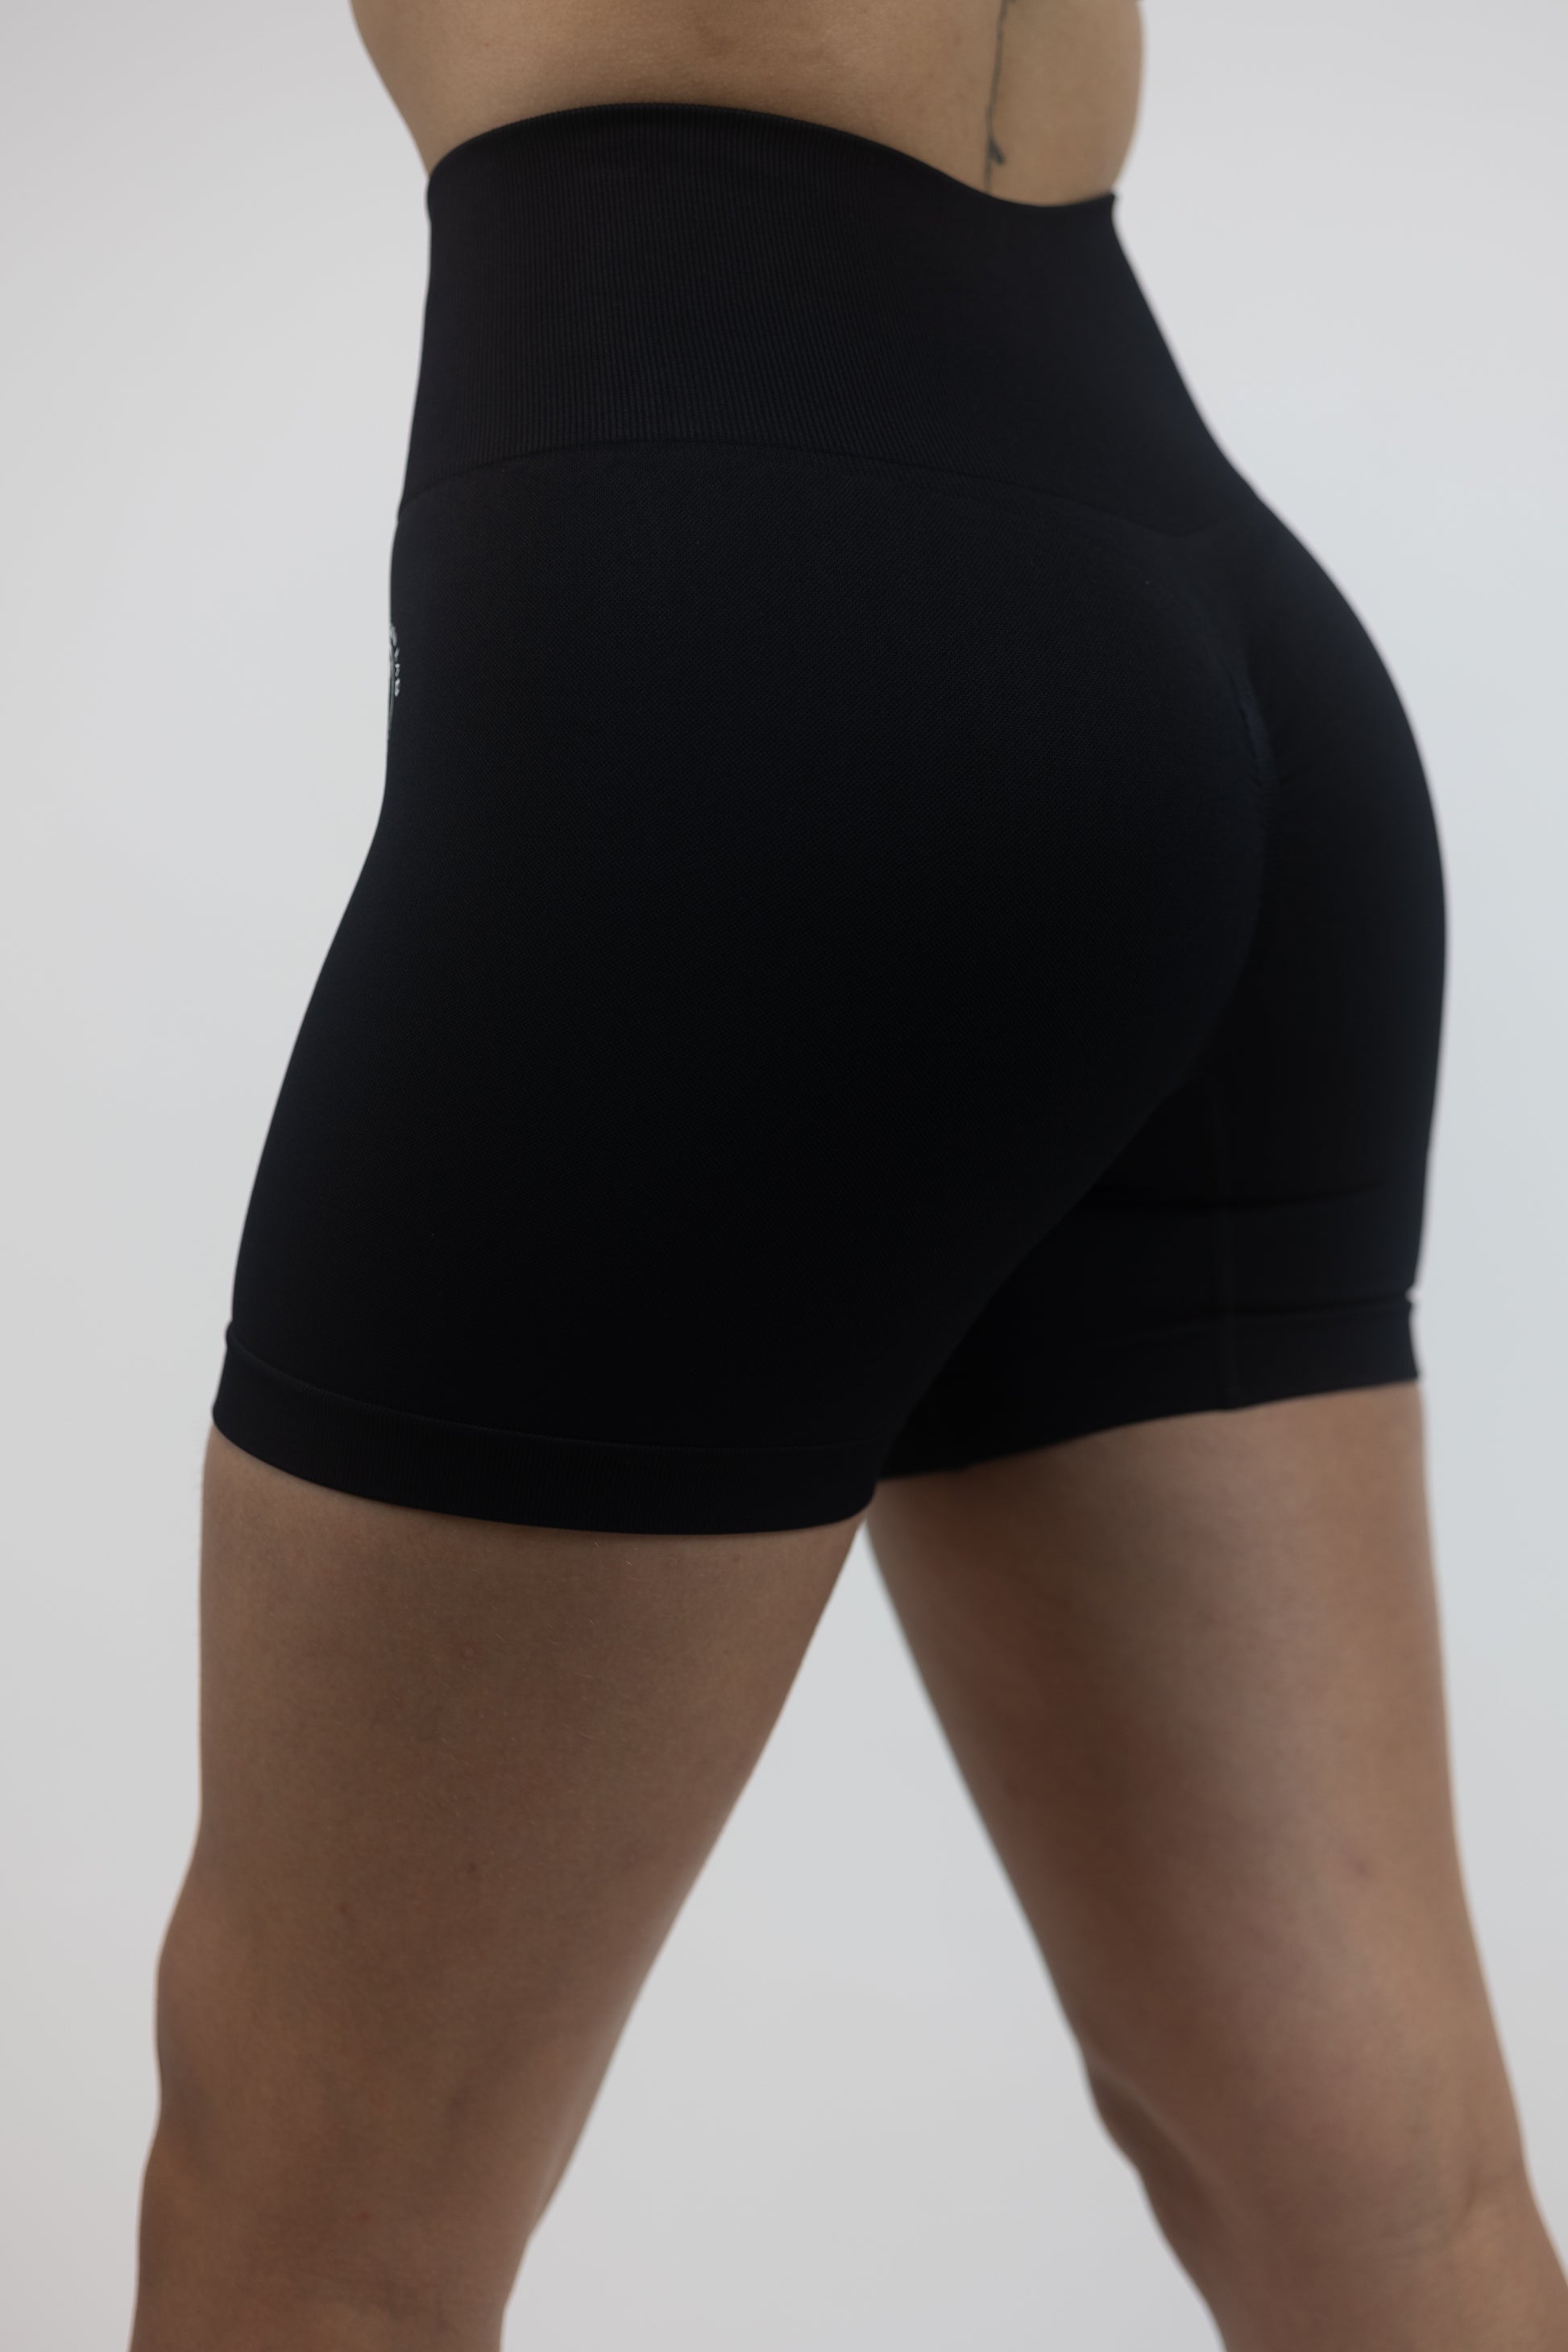 Best fitting women's performance gym shorts